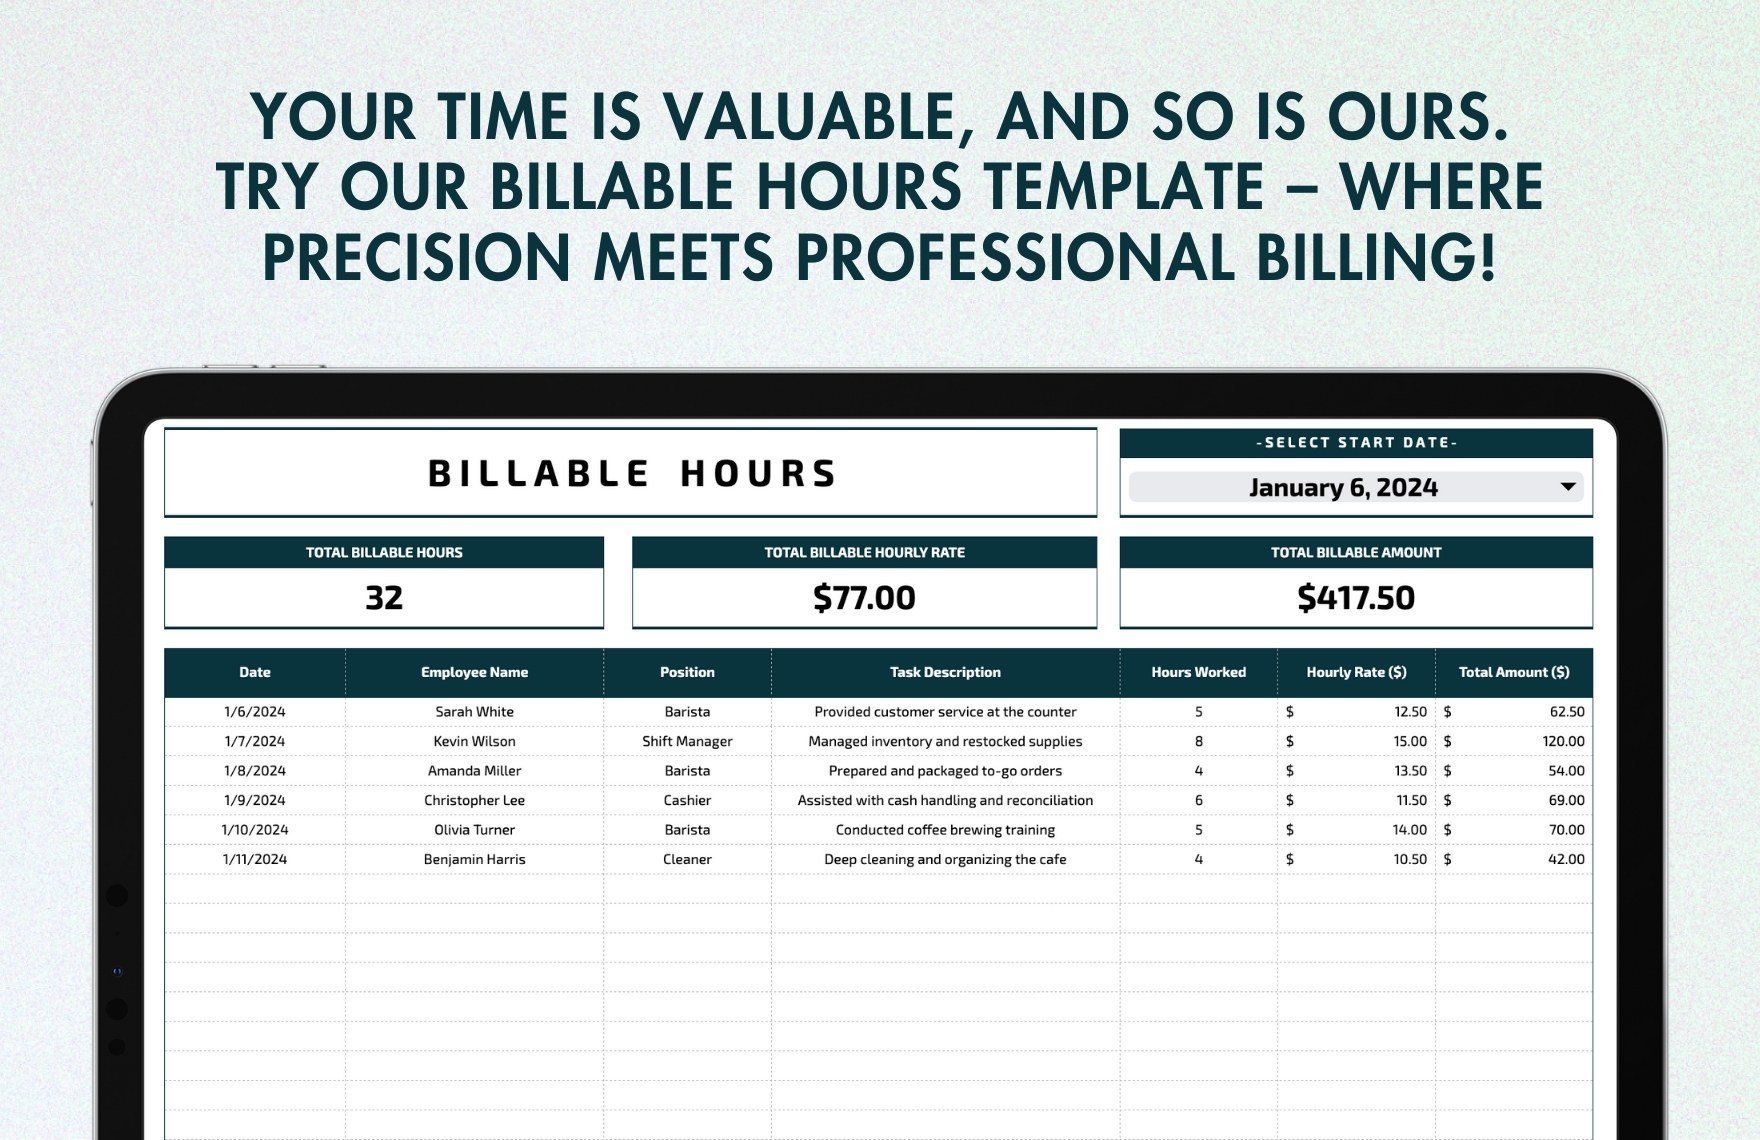 Billable Hours Template